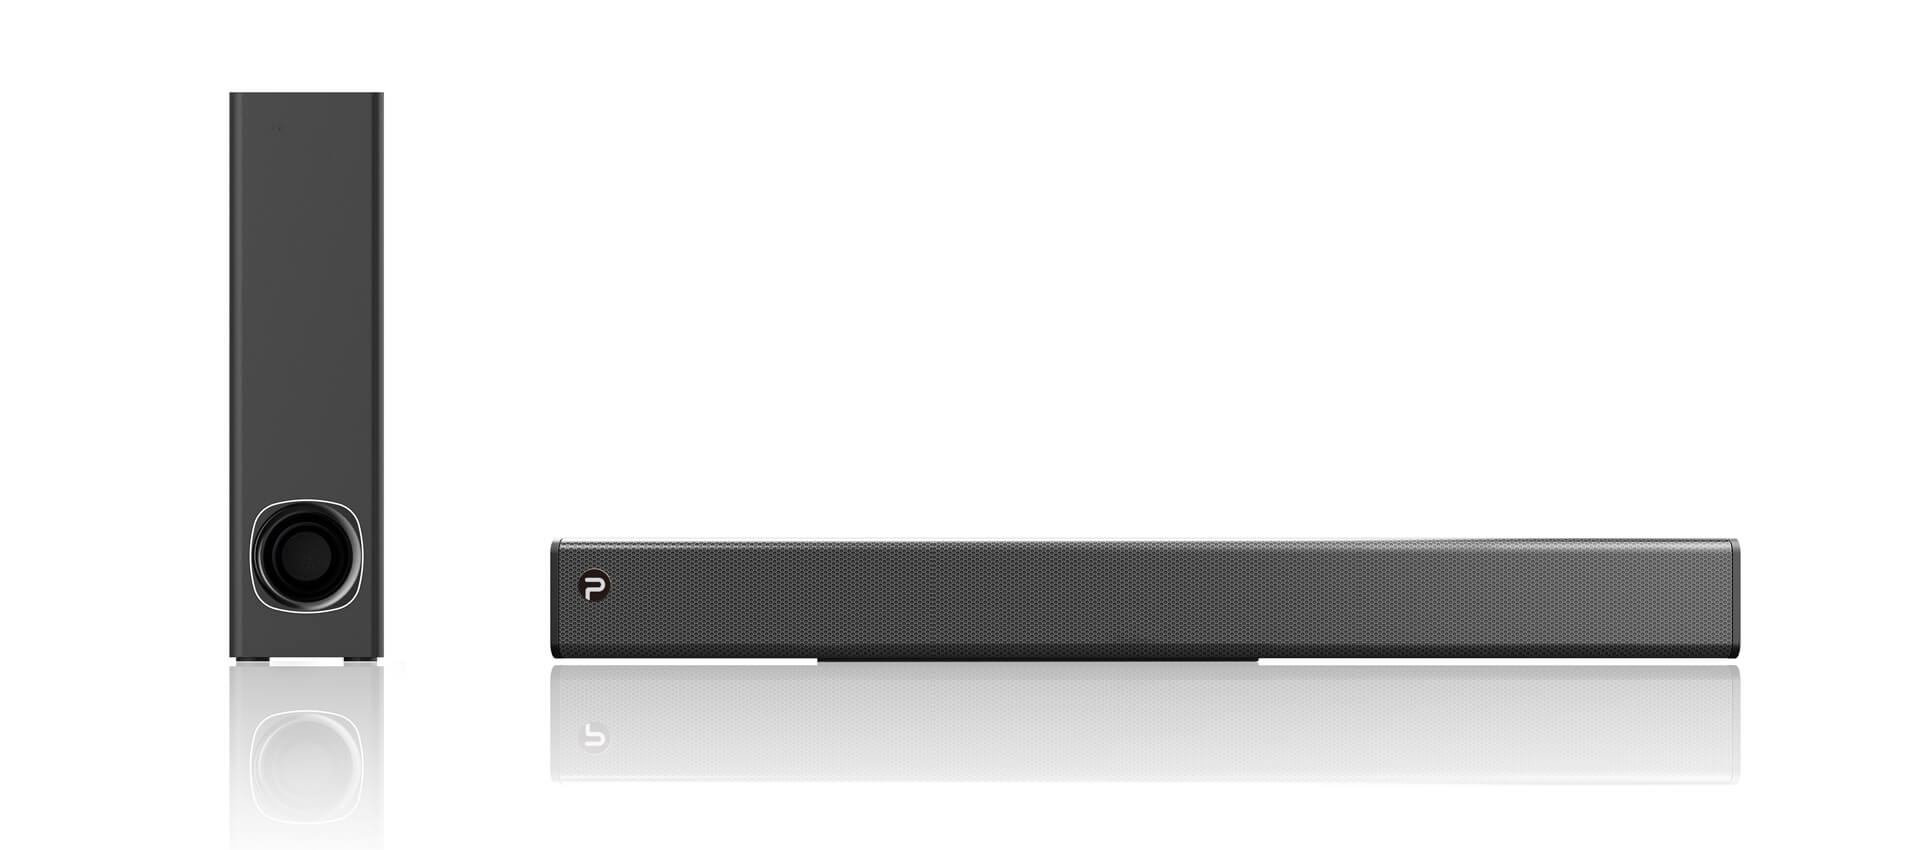 Pheanoo Audio Ltd Releases Smart P27 Soundbars Enriched With Modern Features And Technology For Home Theater